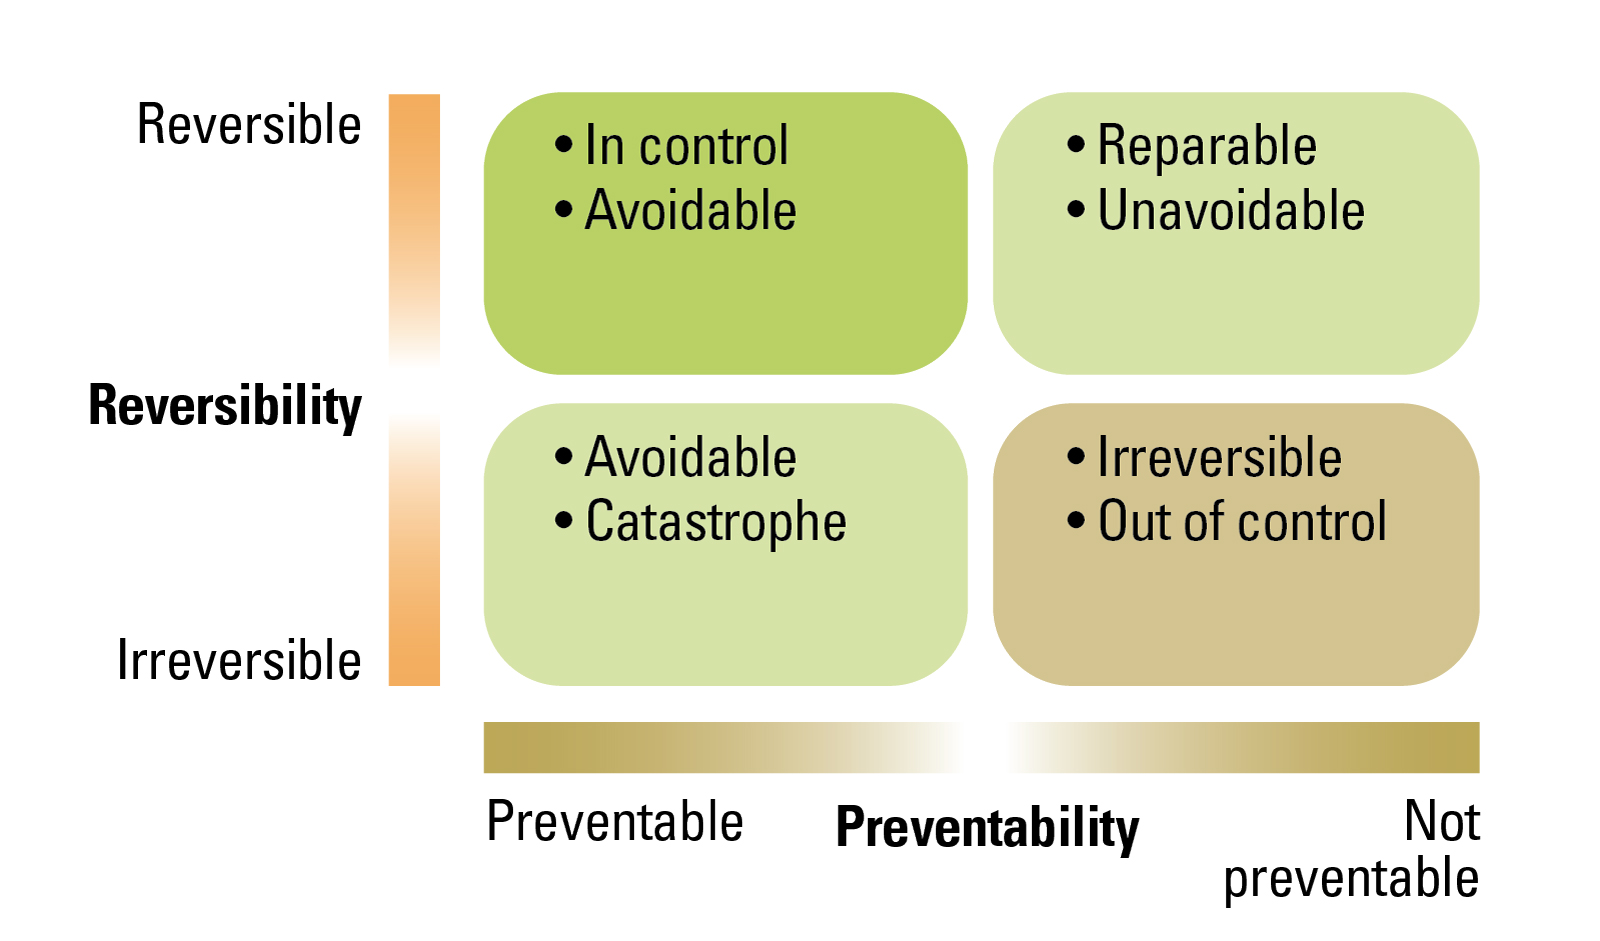 Reversibility and Preventability of Crises